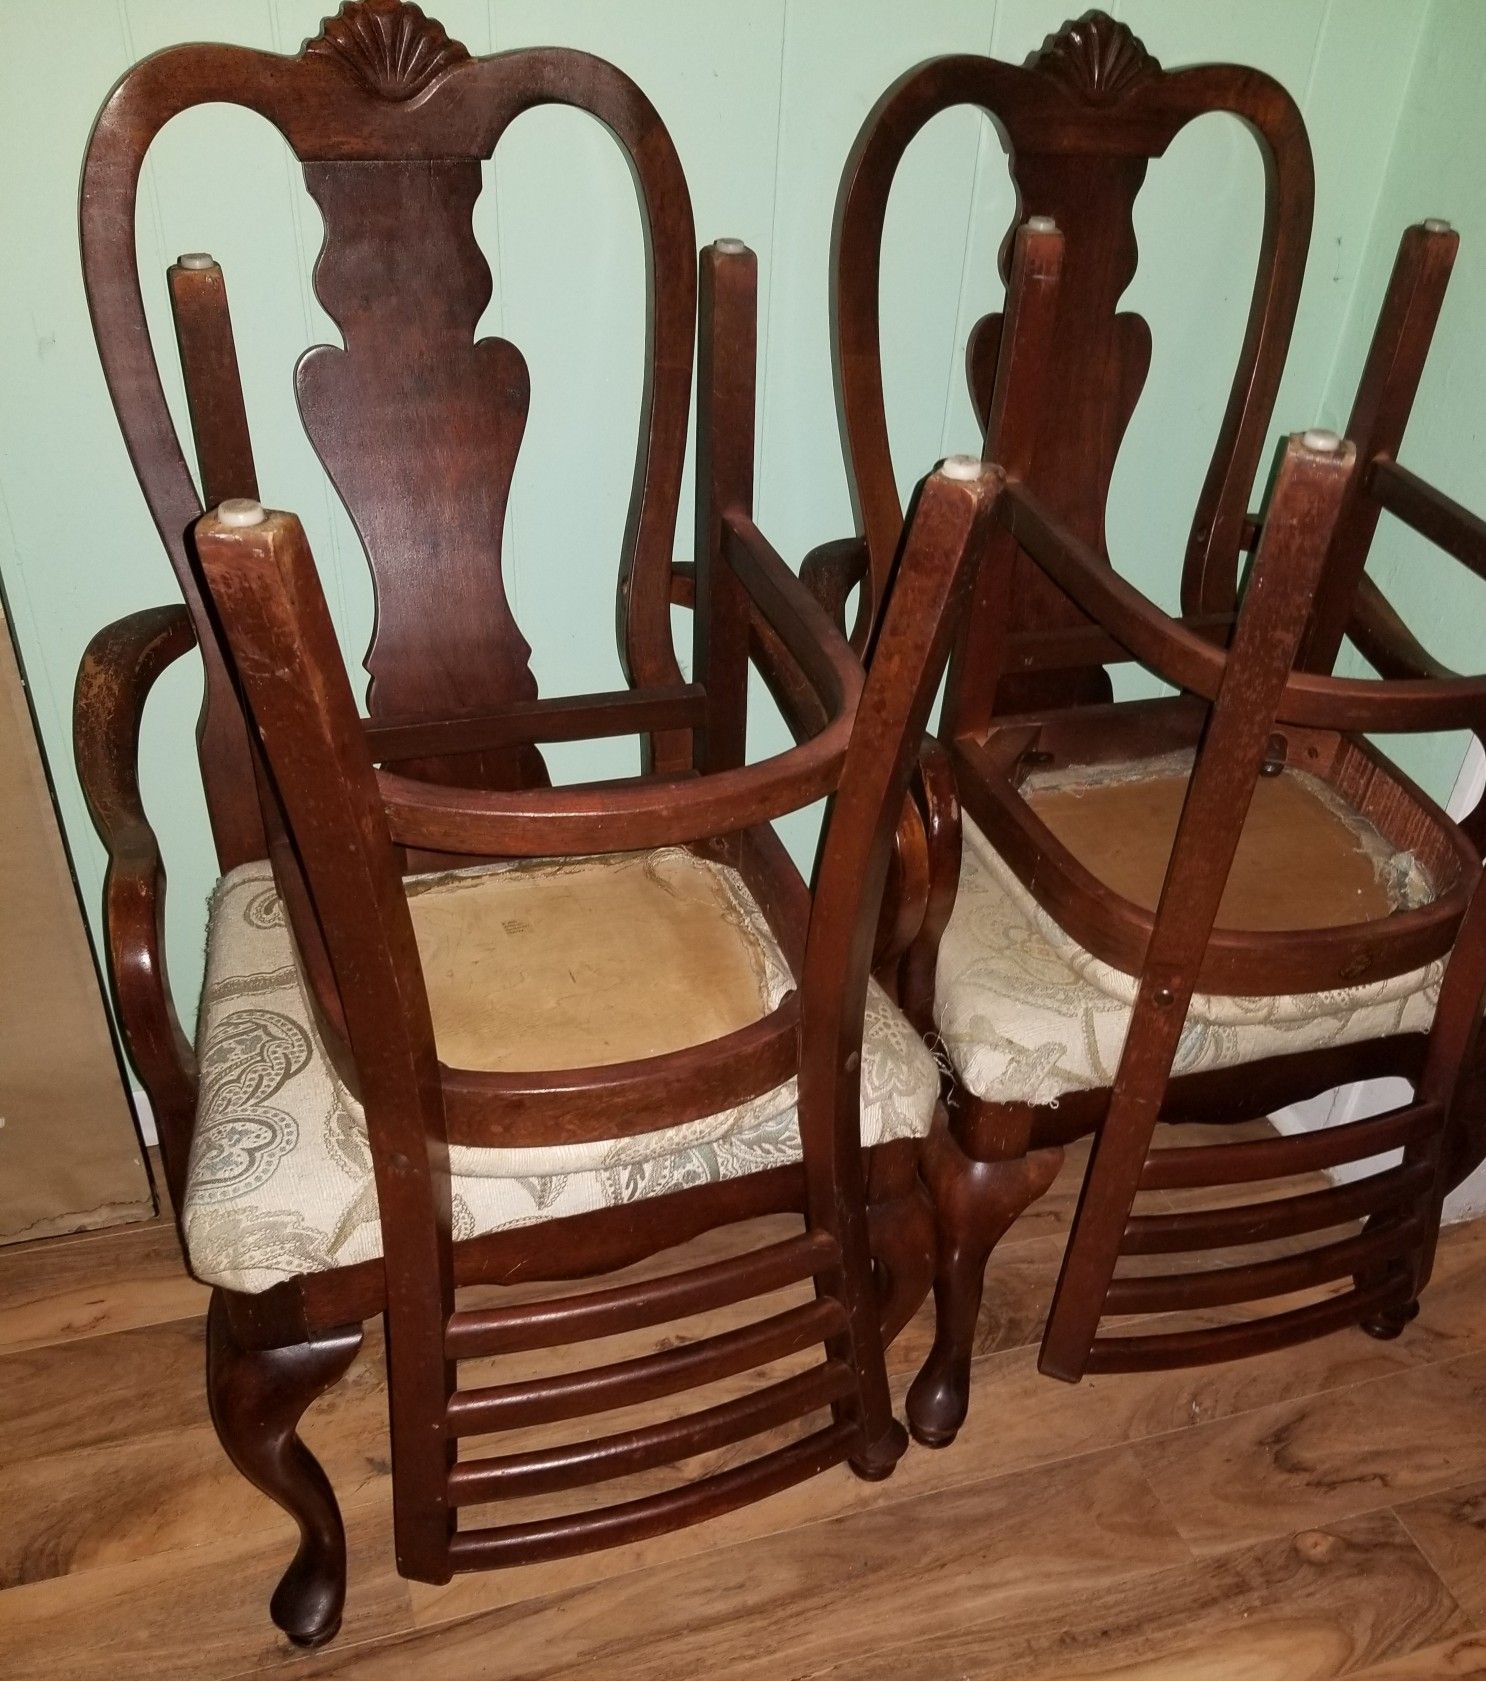 FREE Antique Dining room chairs